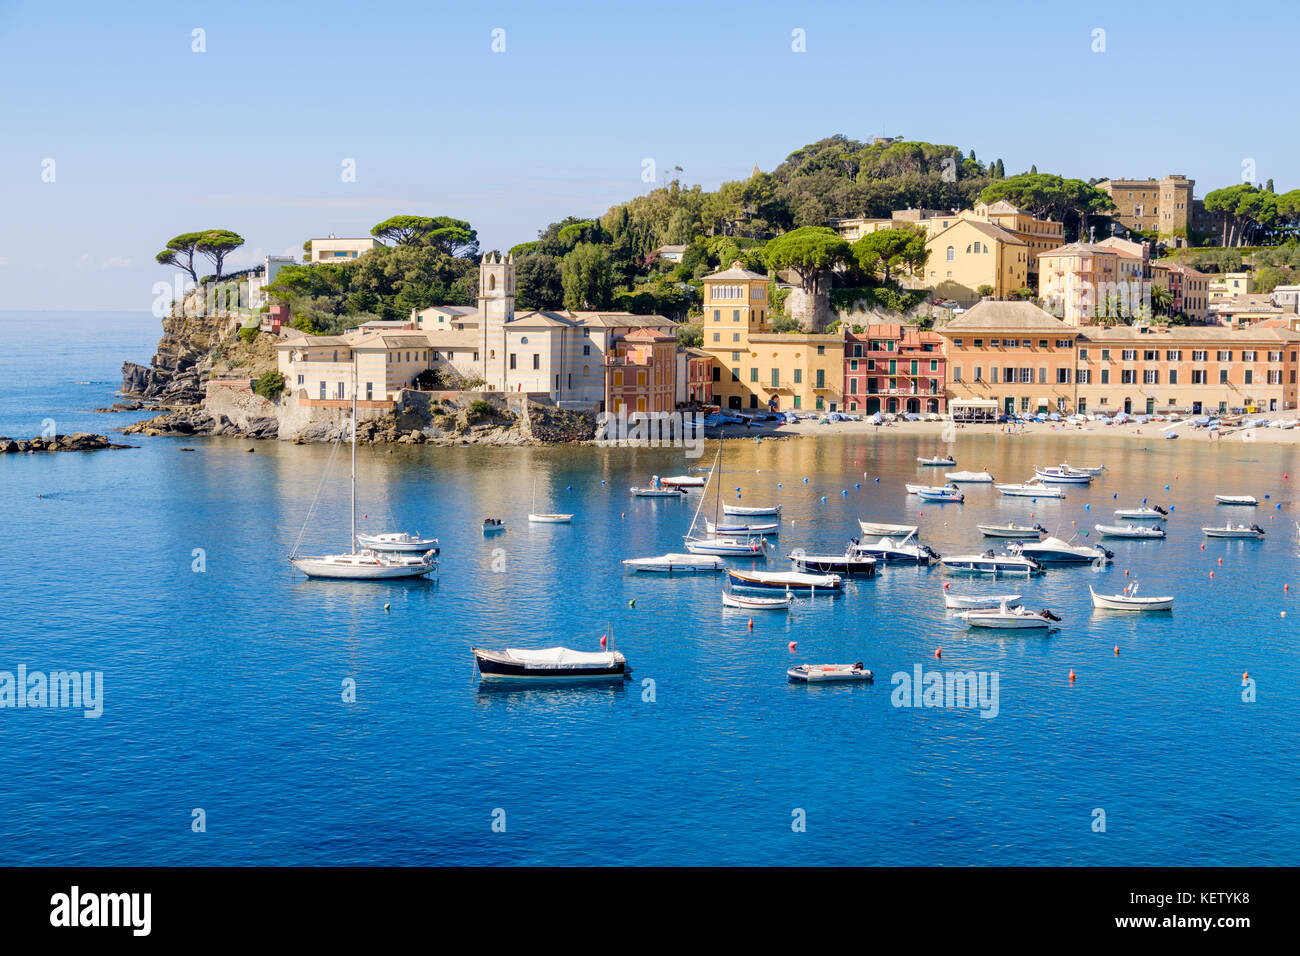 The Bay of Silence and view over the old town of Sestri Levante on the Italian Riviera, Liguria, Italy Stock Photo